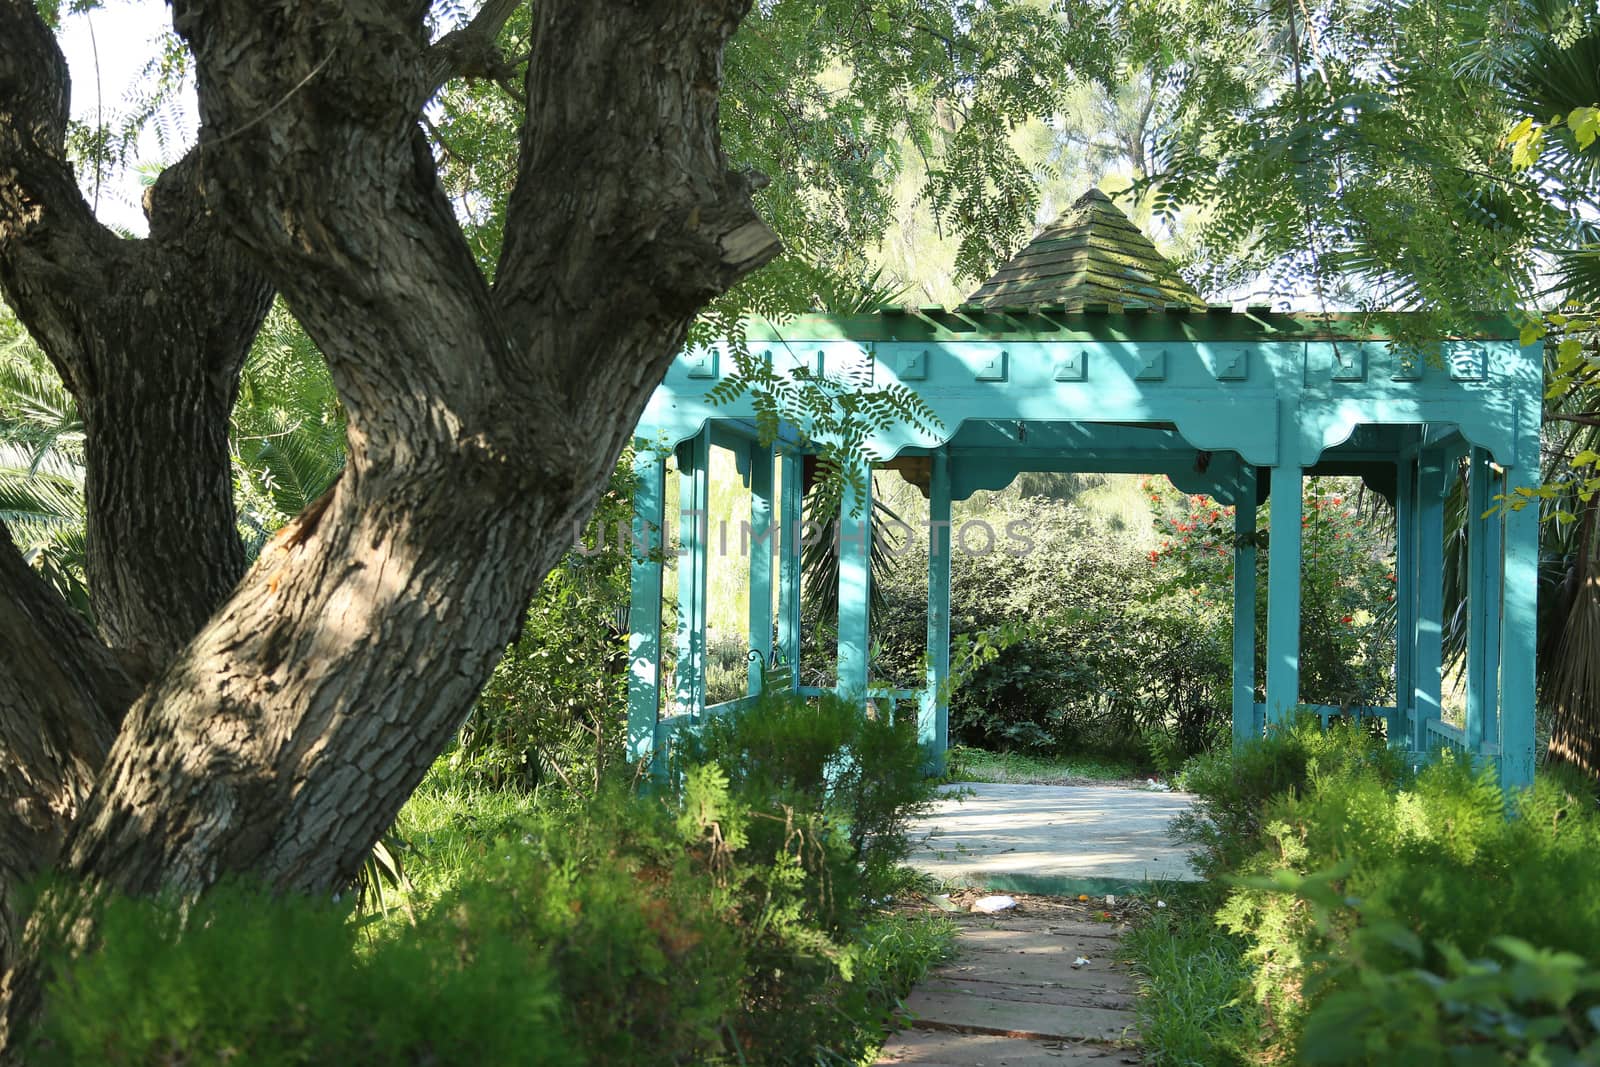 Summerhouse of blue color located in the park and surrounded by greenness